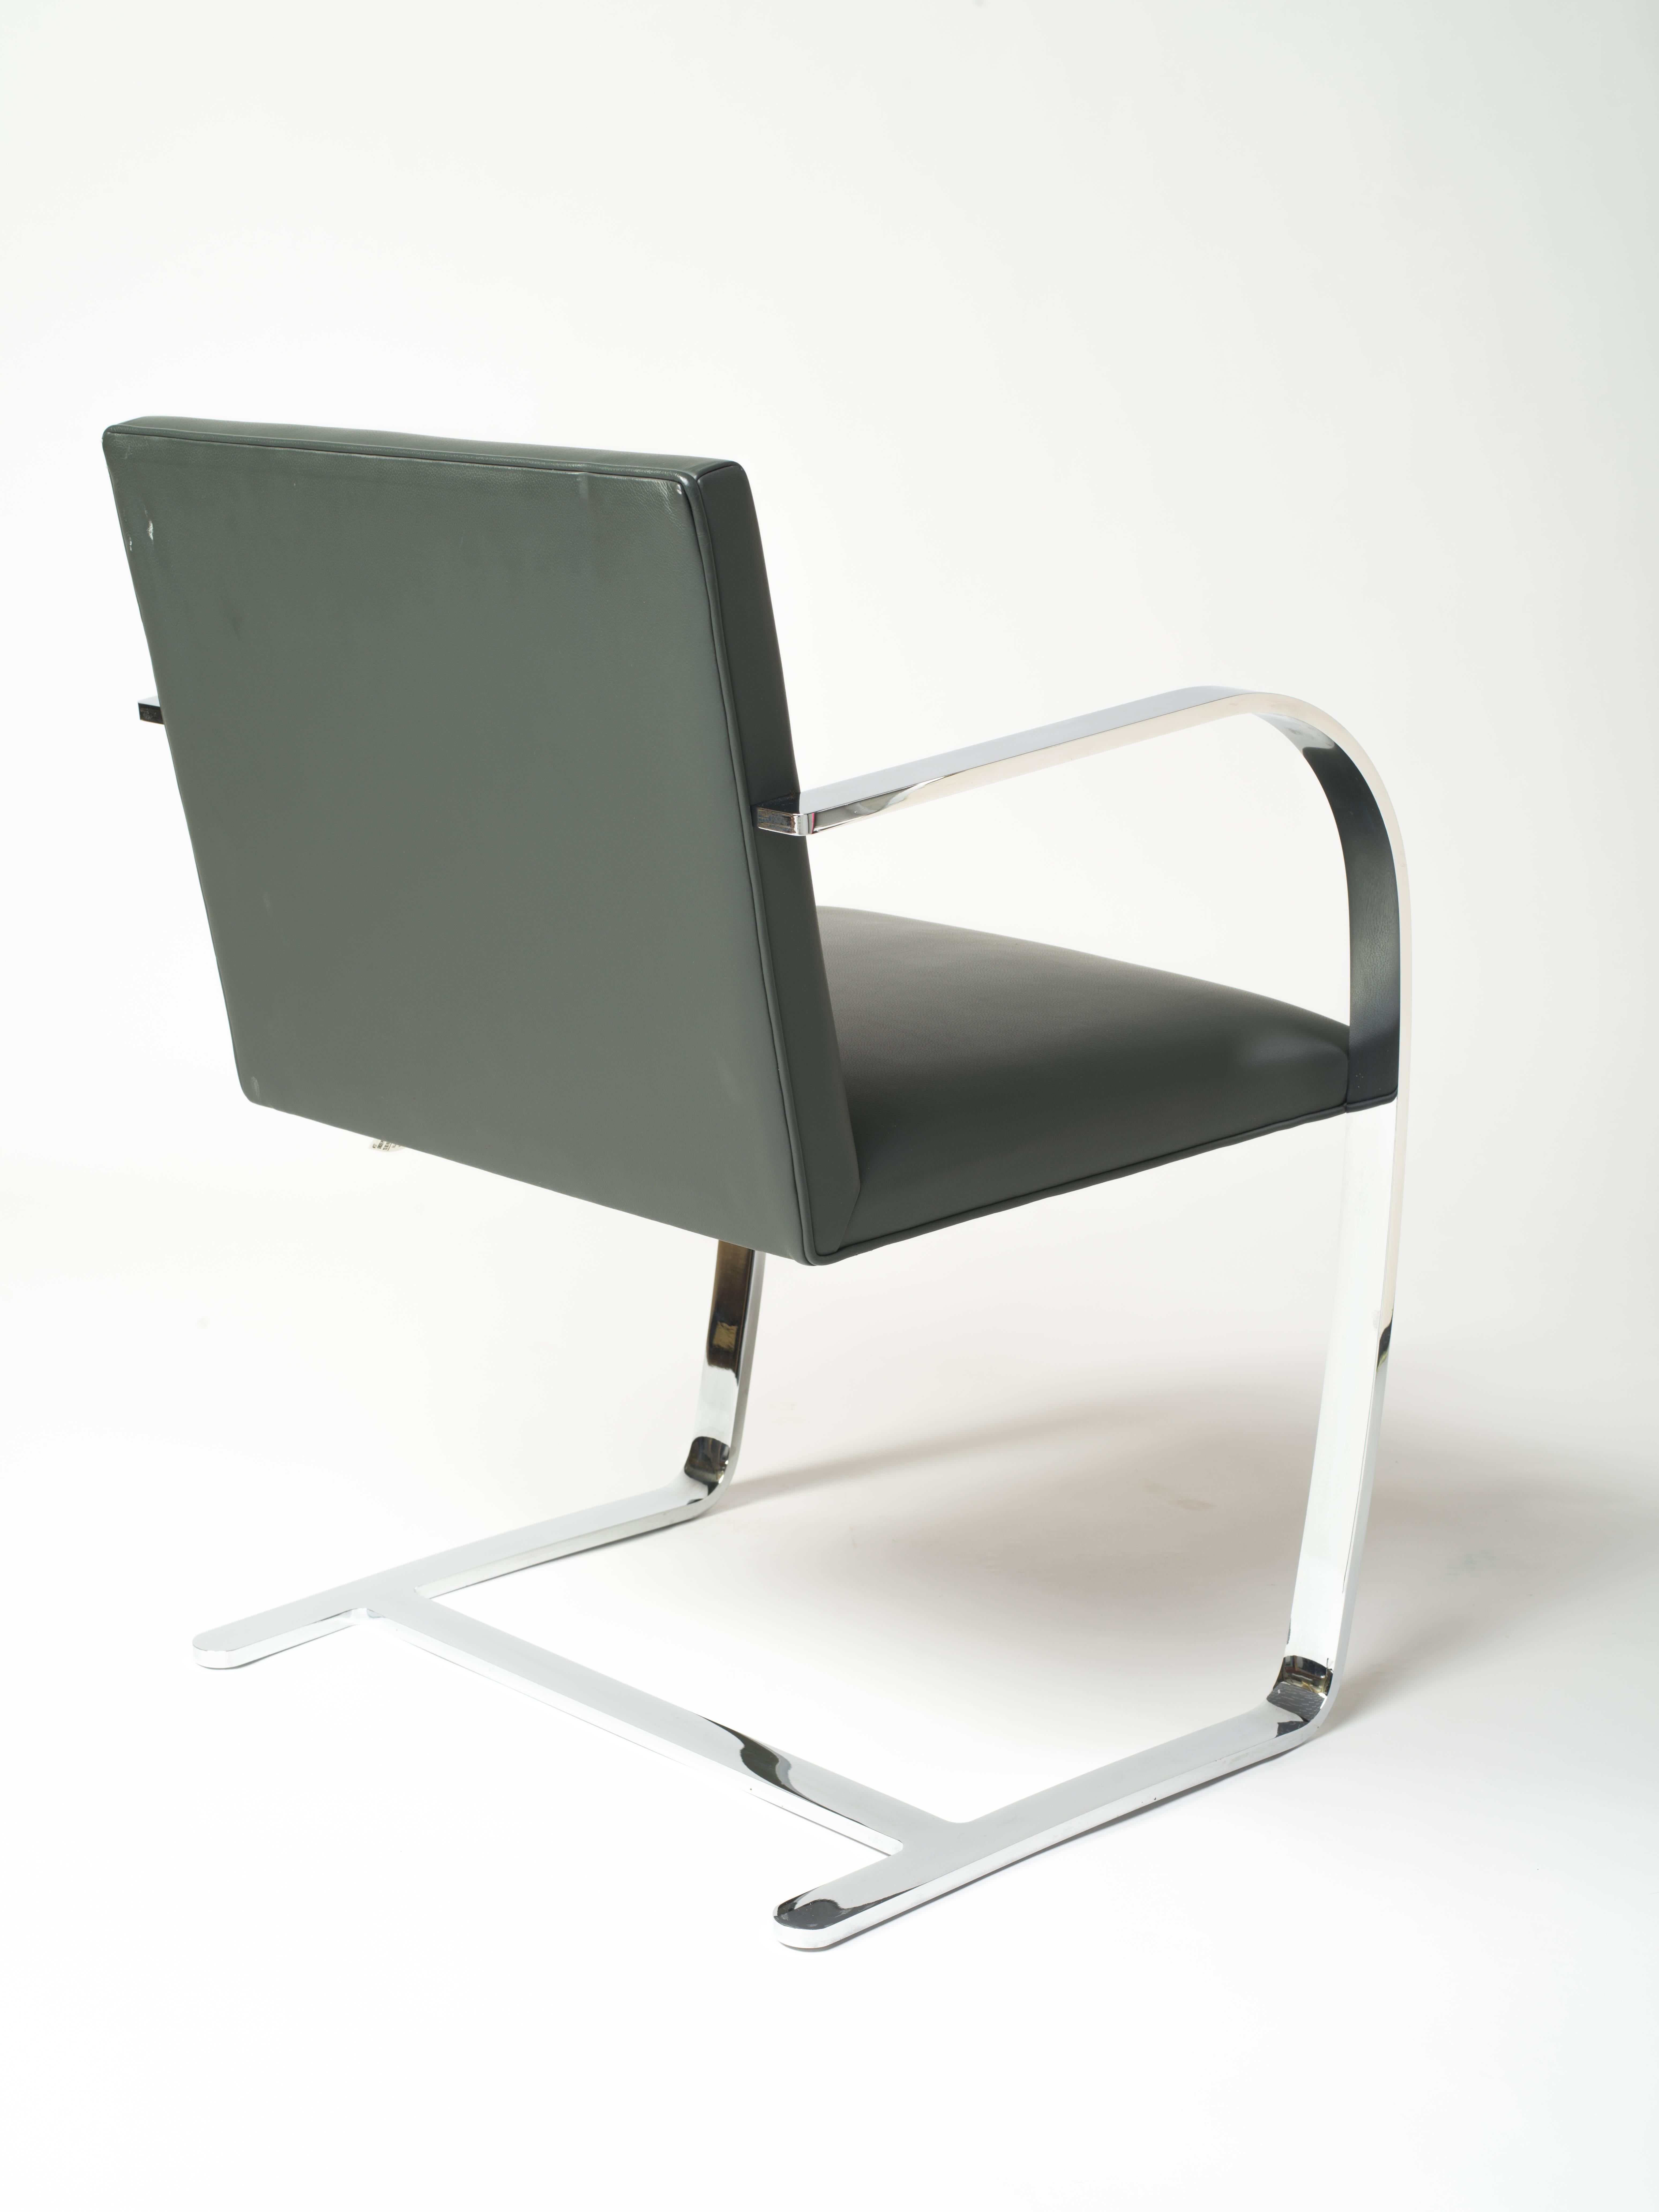 American Pair of Brno Chairs in Elephant Grey Leather by Knoll Studio